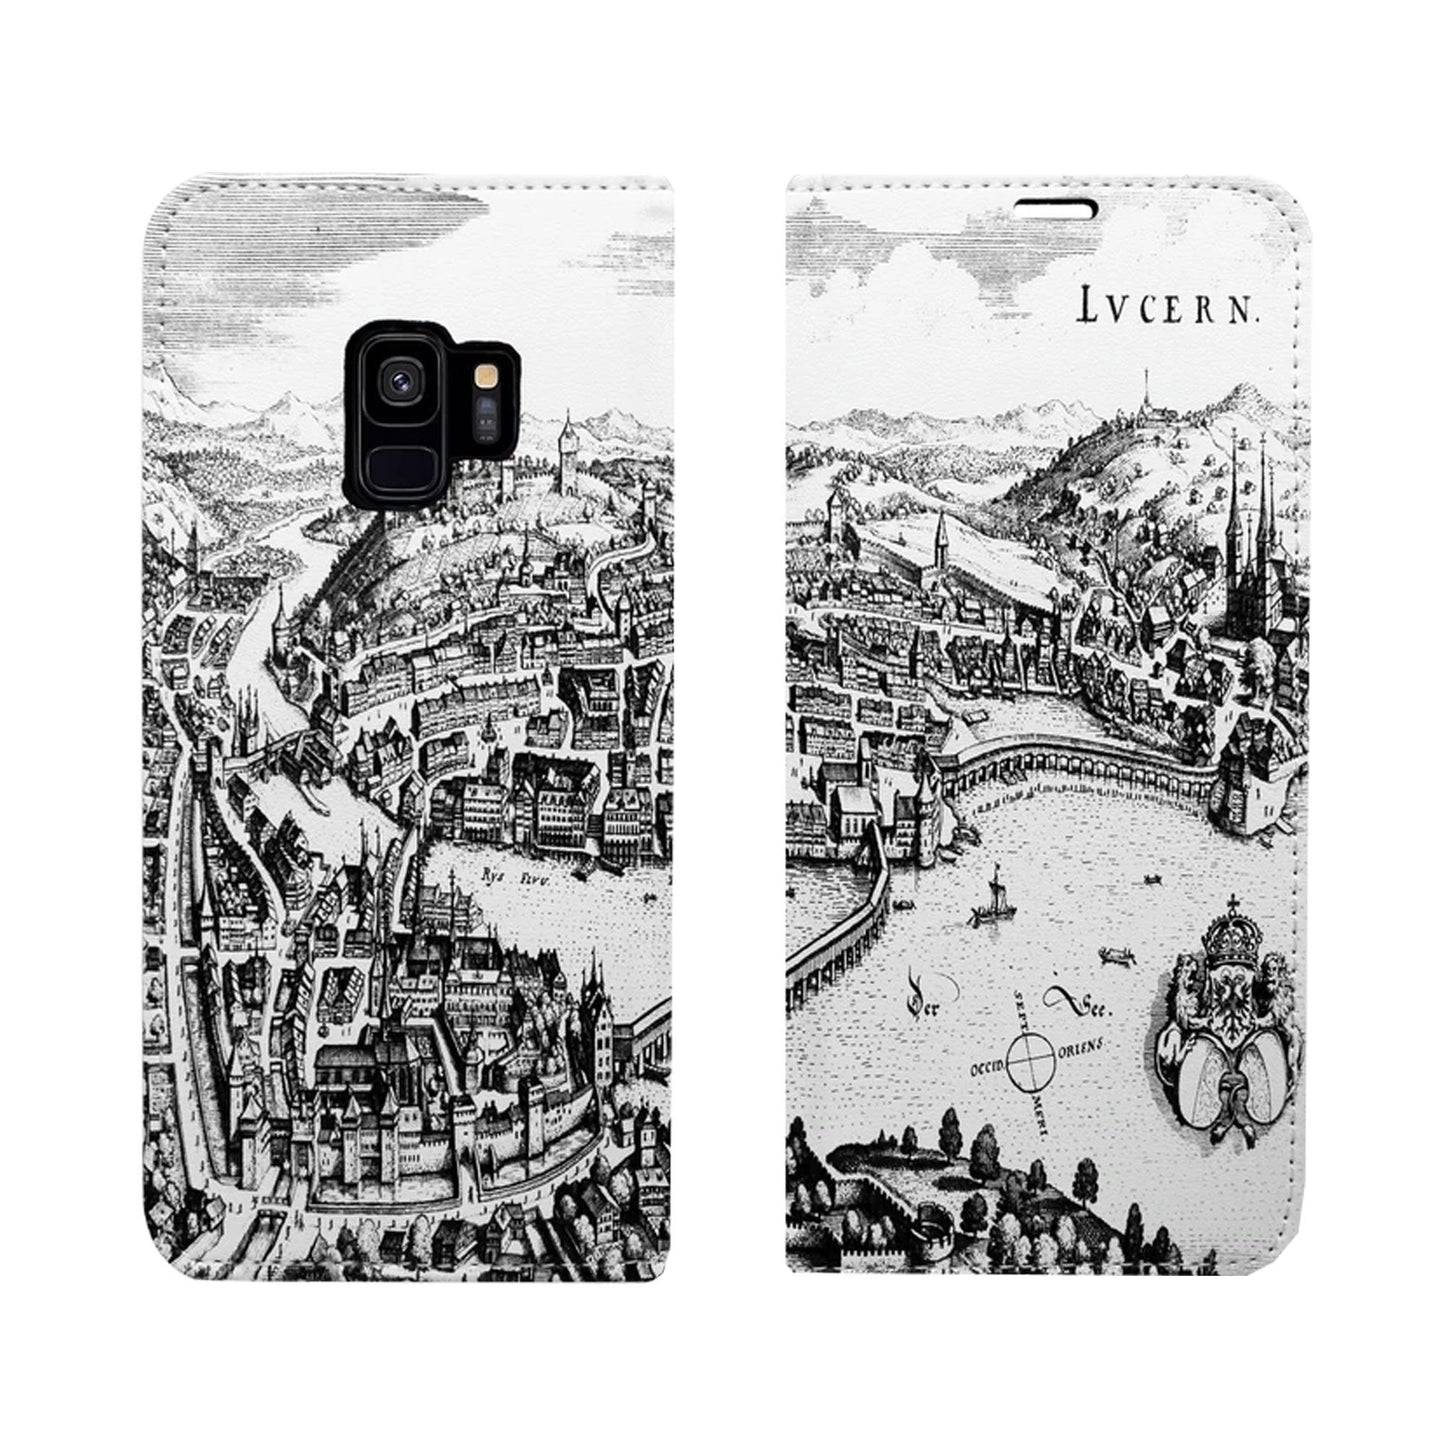 Lucerne Merian Panorama Case for iPhone and Samsung